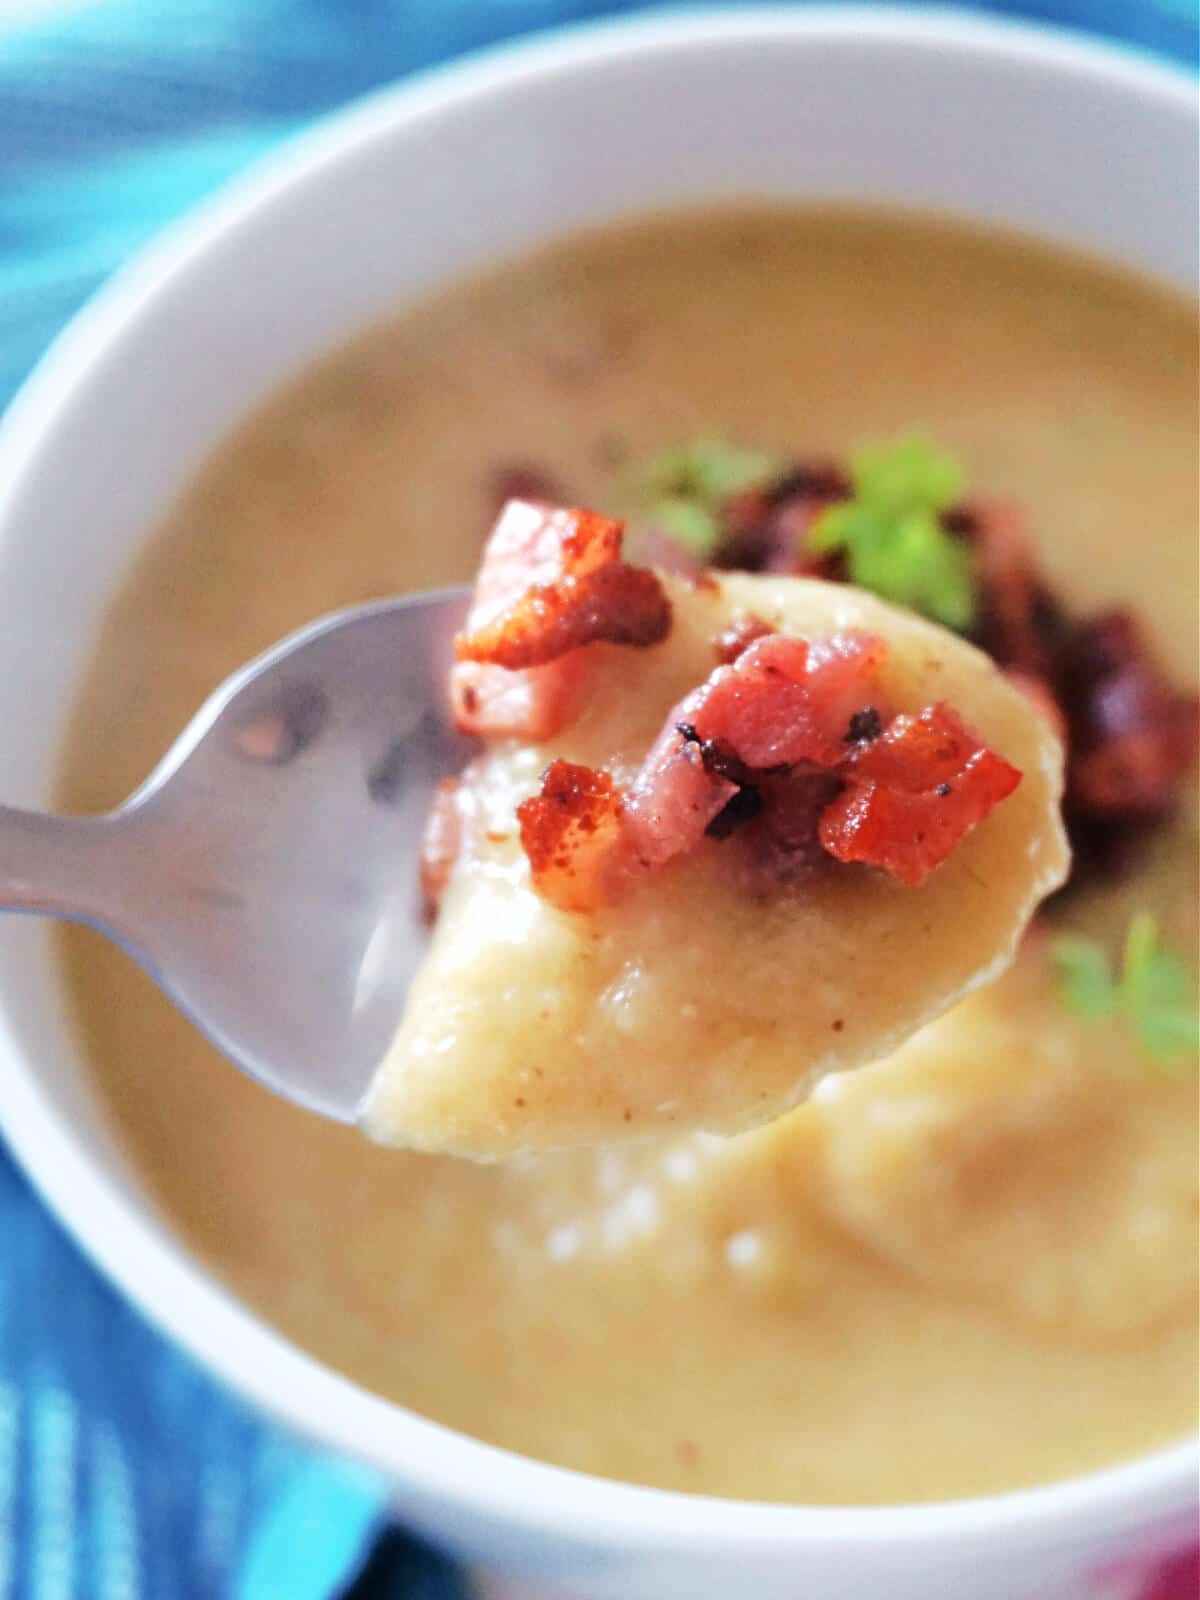 A spoonful of creamed leek and potato soup with bacon bits.